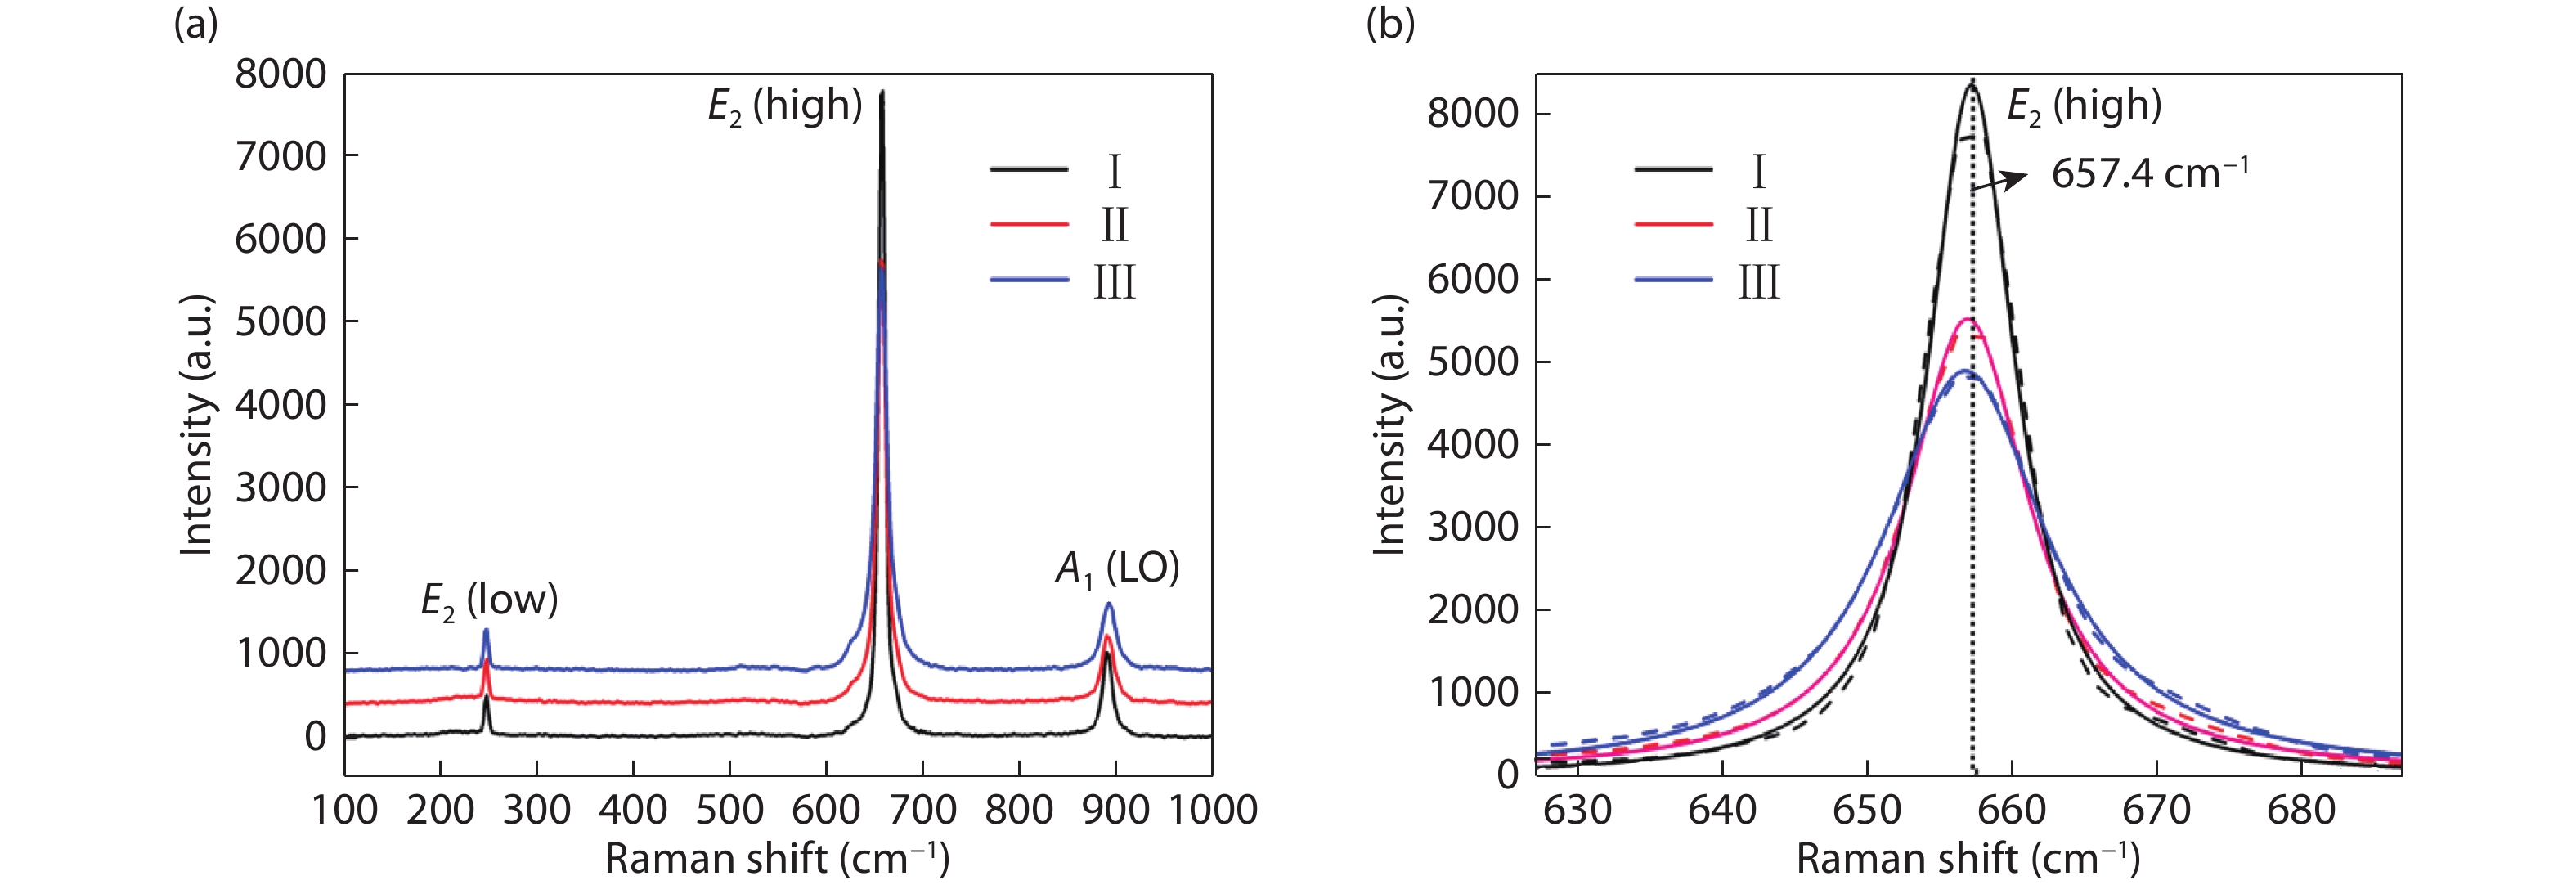 (Color online) Raman spectrum of AlN samples. (a) Wavelength from 100 to 1000 nm. (b) Detailed E2 (high) phone mode peaks.